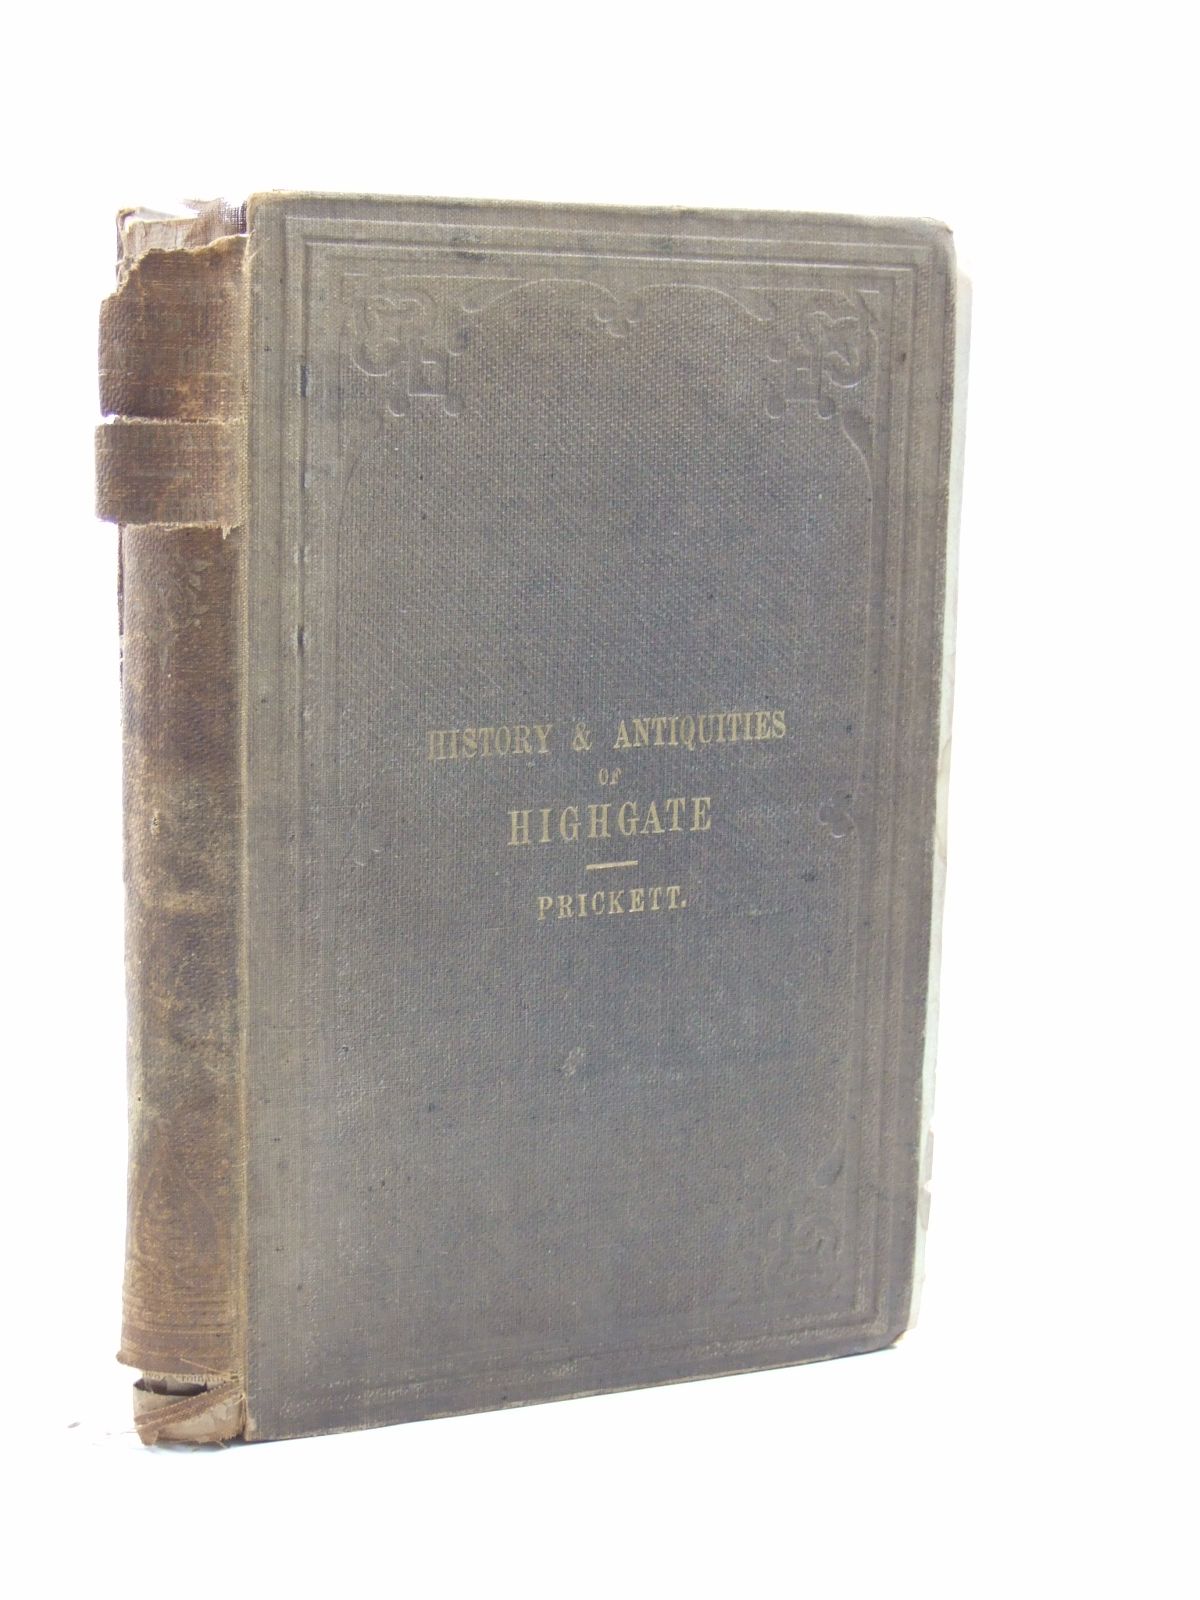 Photo of THE HISTORY AND ANTIQUITIES OF HIGHGATE, MIDDLESEX written by Prickett, Frederick published by Frederick Prickett (STOCK CODE: 1604098)  for sale by Stella & Rose's Books